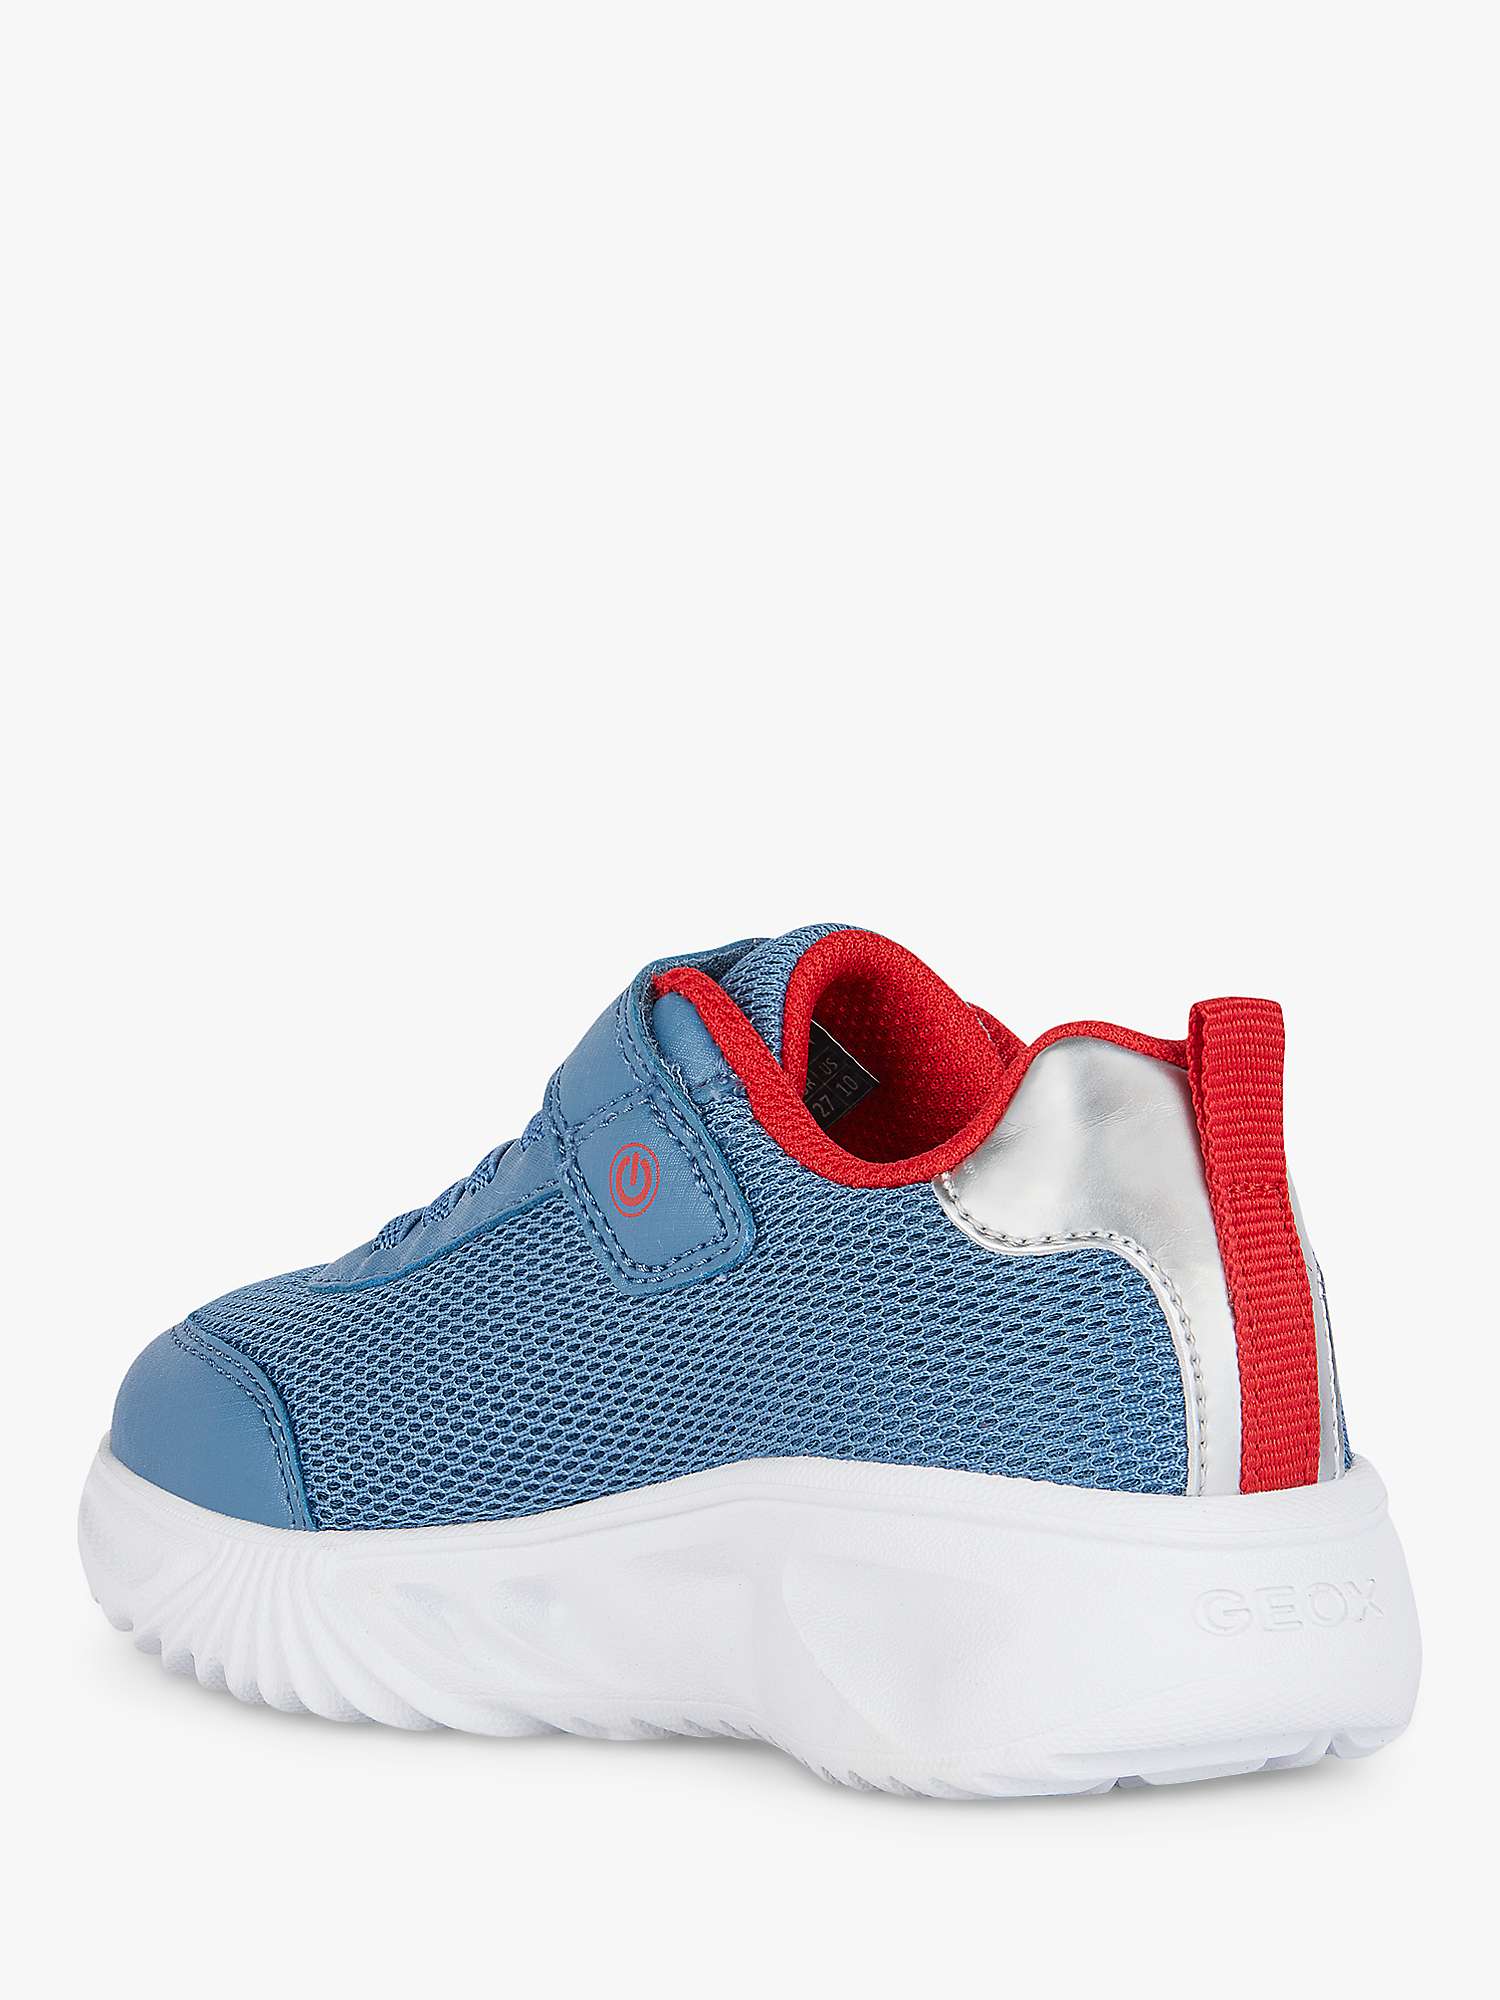 Buy Geox Kids' Assister Light Up Trainers Online at johnlewis.com